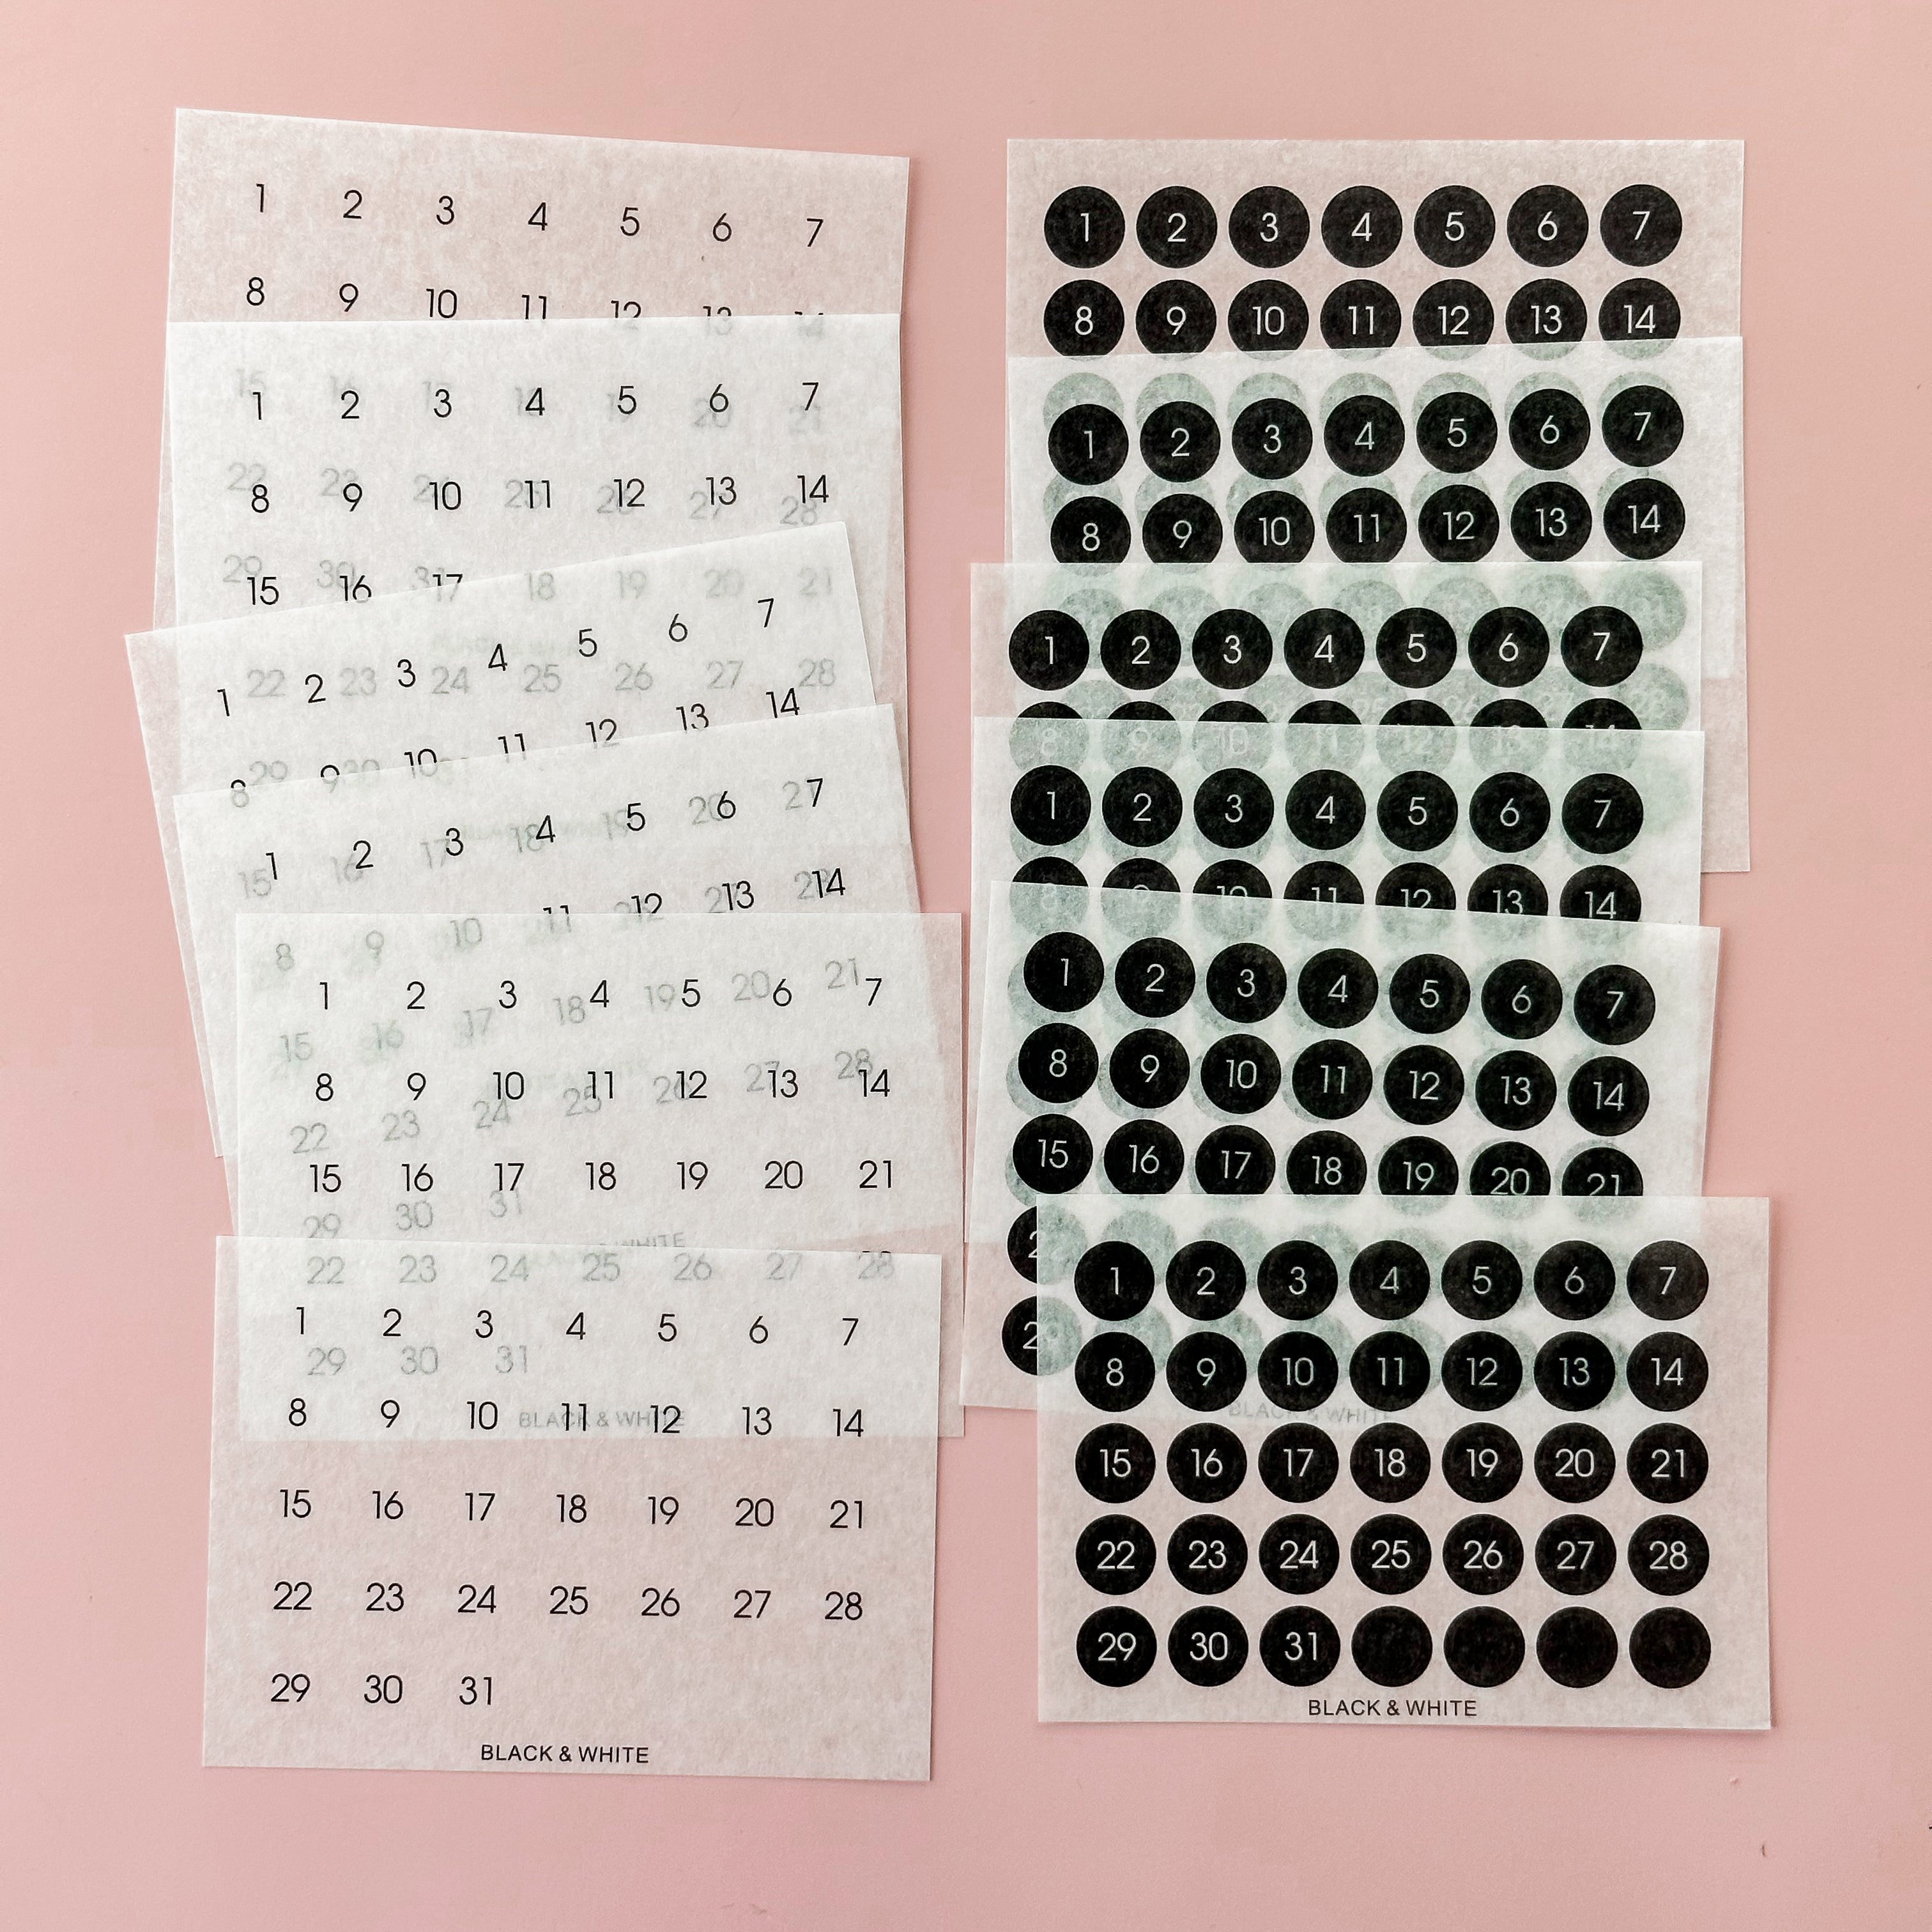 These are dated stickers that will help you do your monthly BUJO spread with the days 1 through 31. These are sold at BBB Supplies Craft Shop.